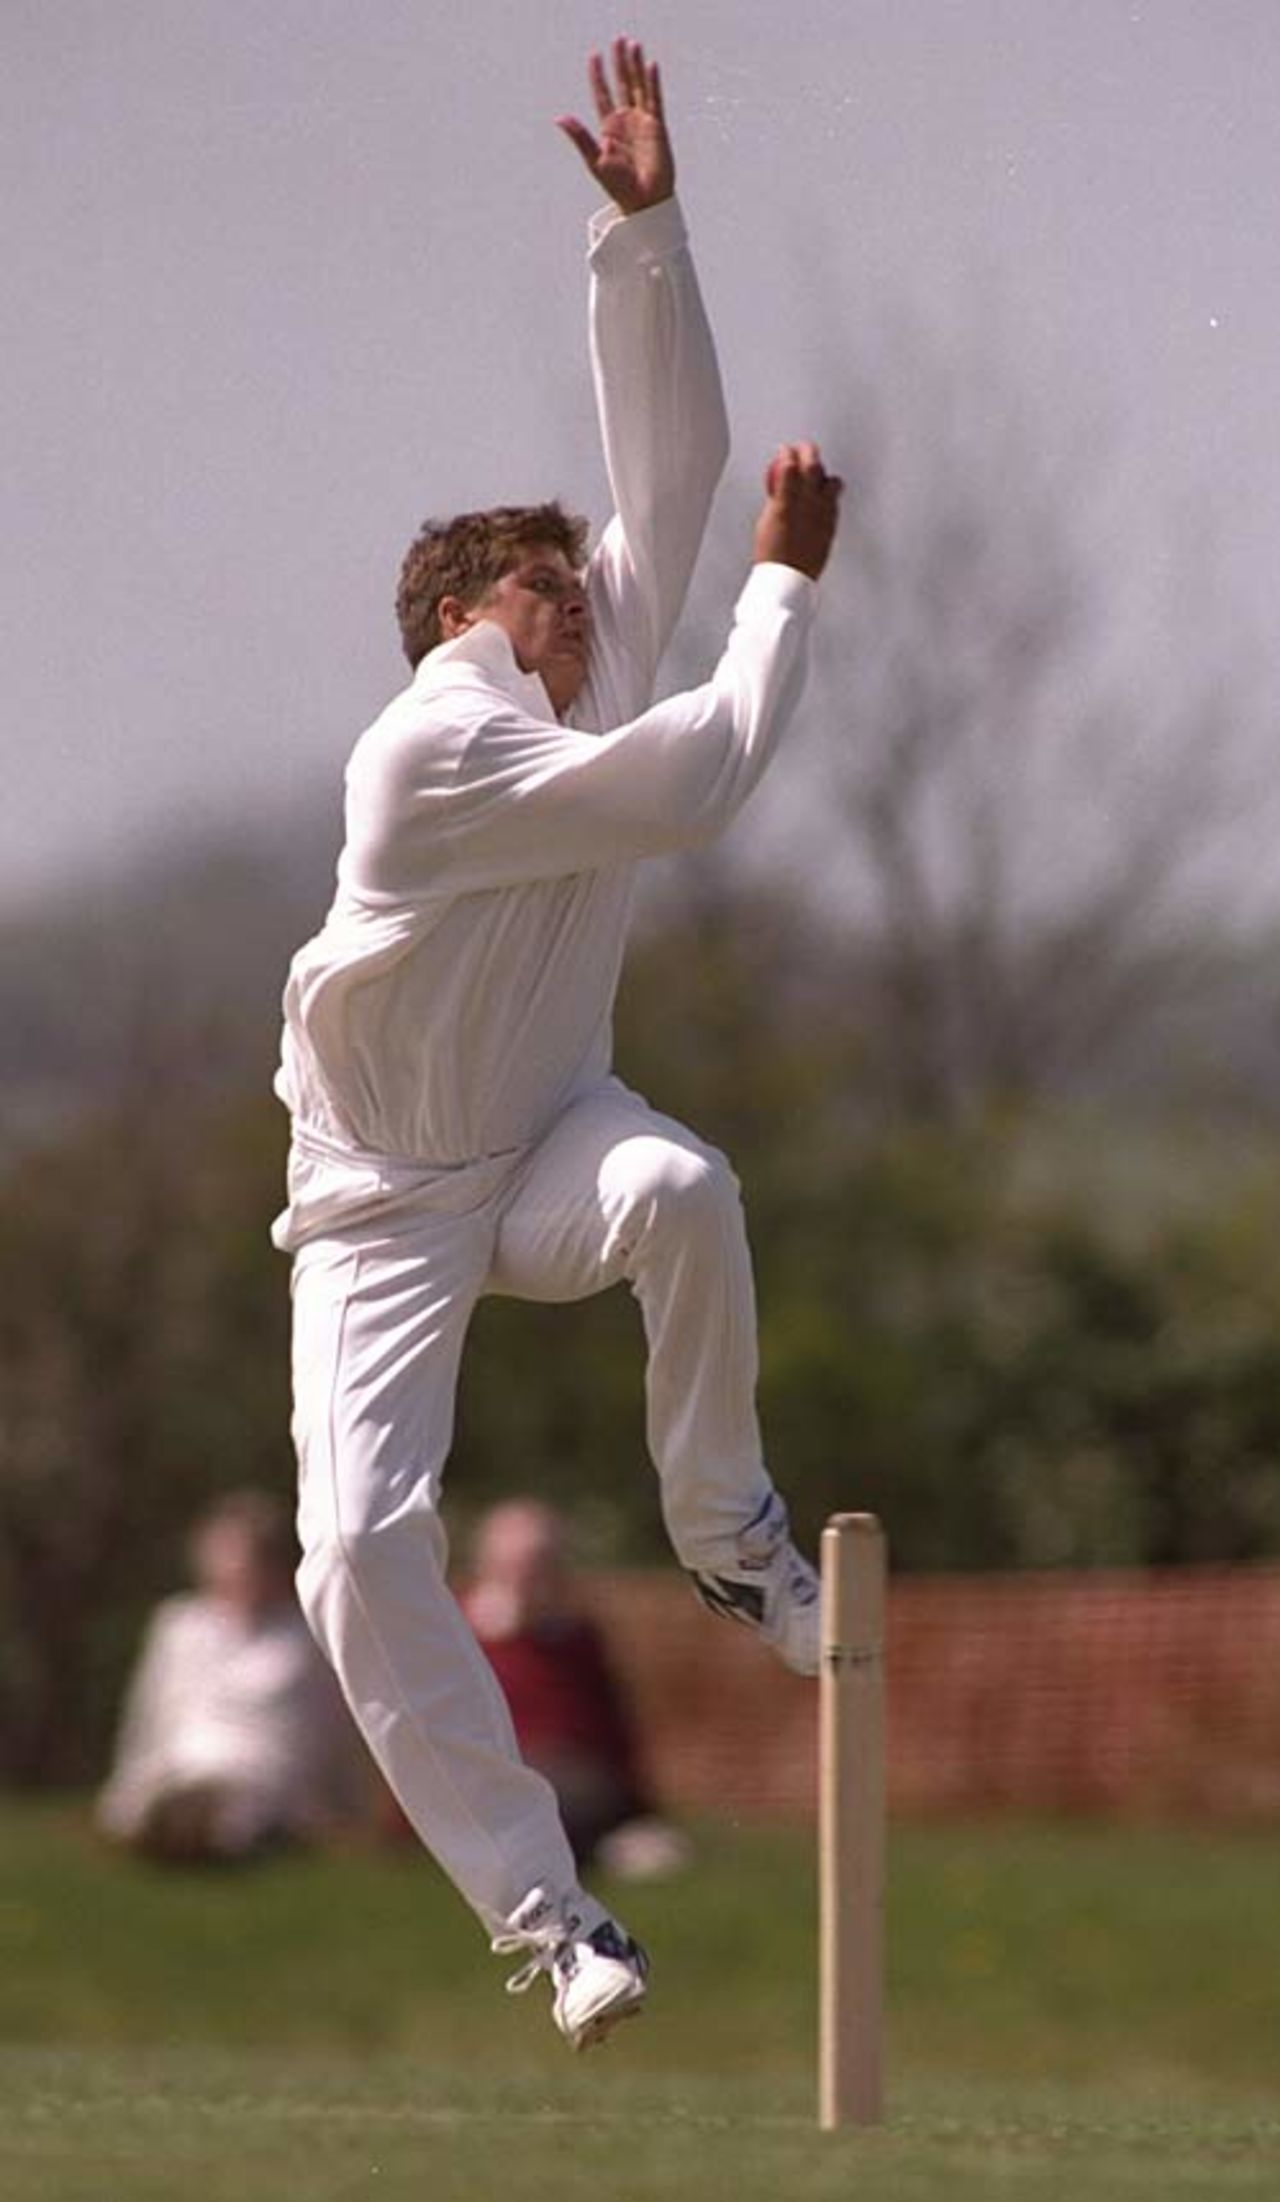 Chris Pringle bowling for Hitchin Cricket Club, New Zealand, April 26, 1995